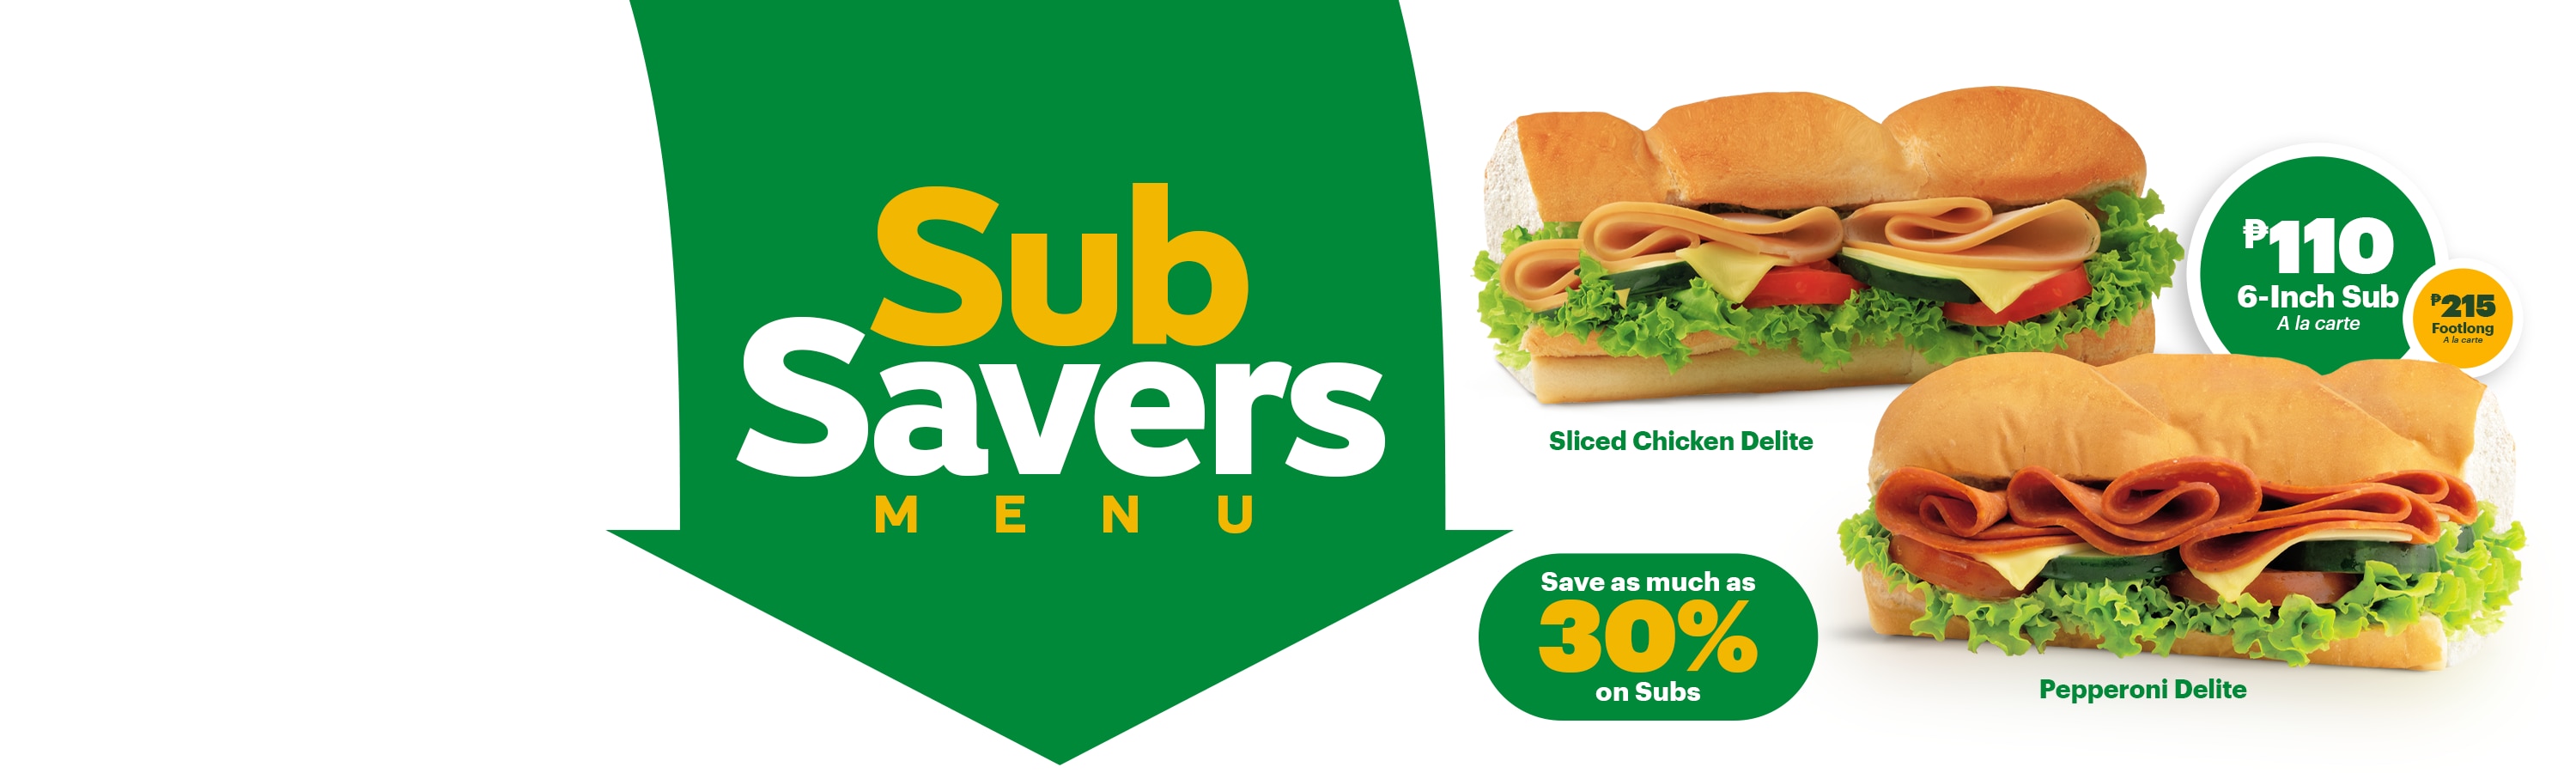 Start your day with our Everyday - Subway Philippines